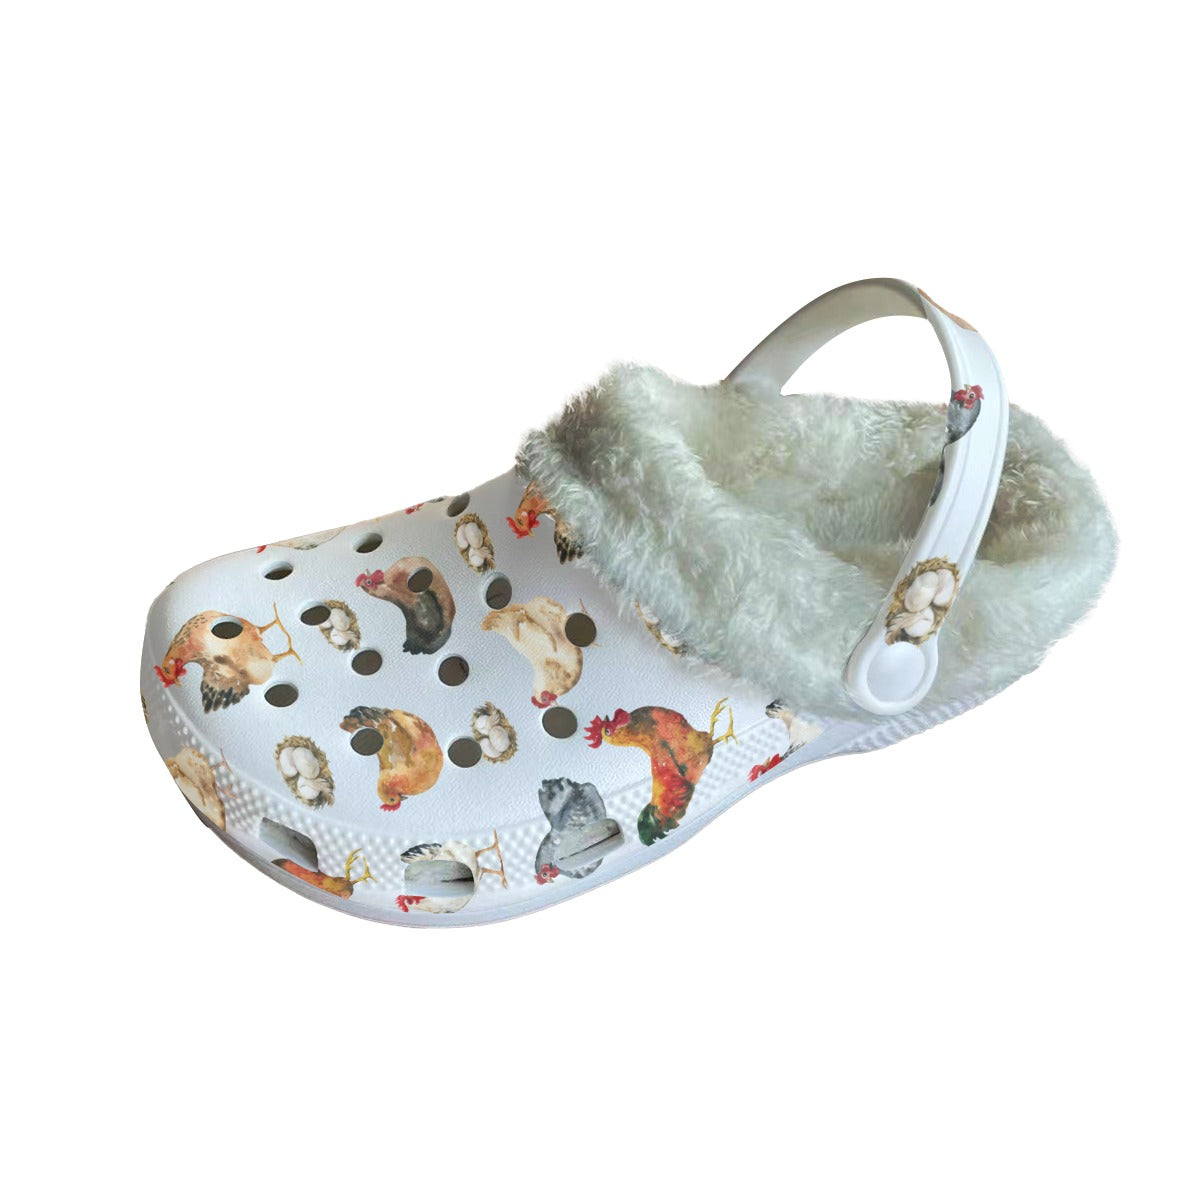 Chicken Women's Classic Clogs with Fleece 15-20 business day turnaround time